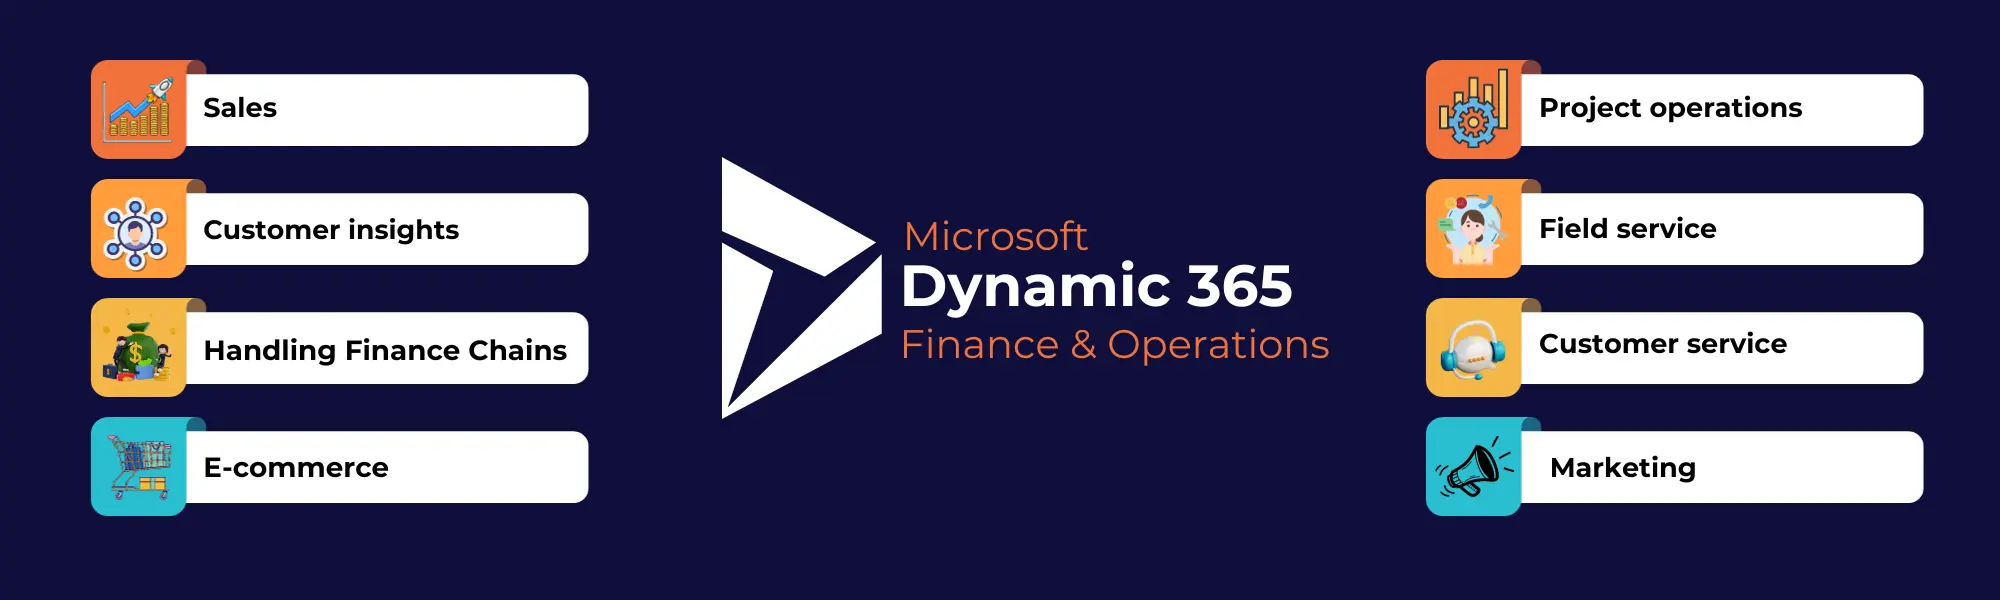 dynamics 365 for finance and operations